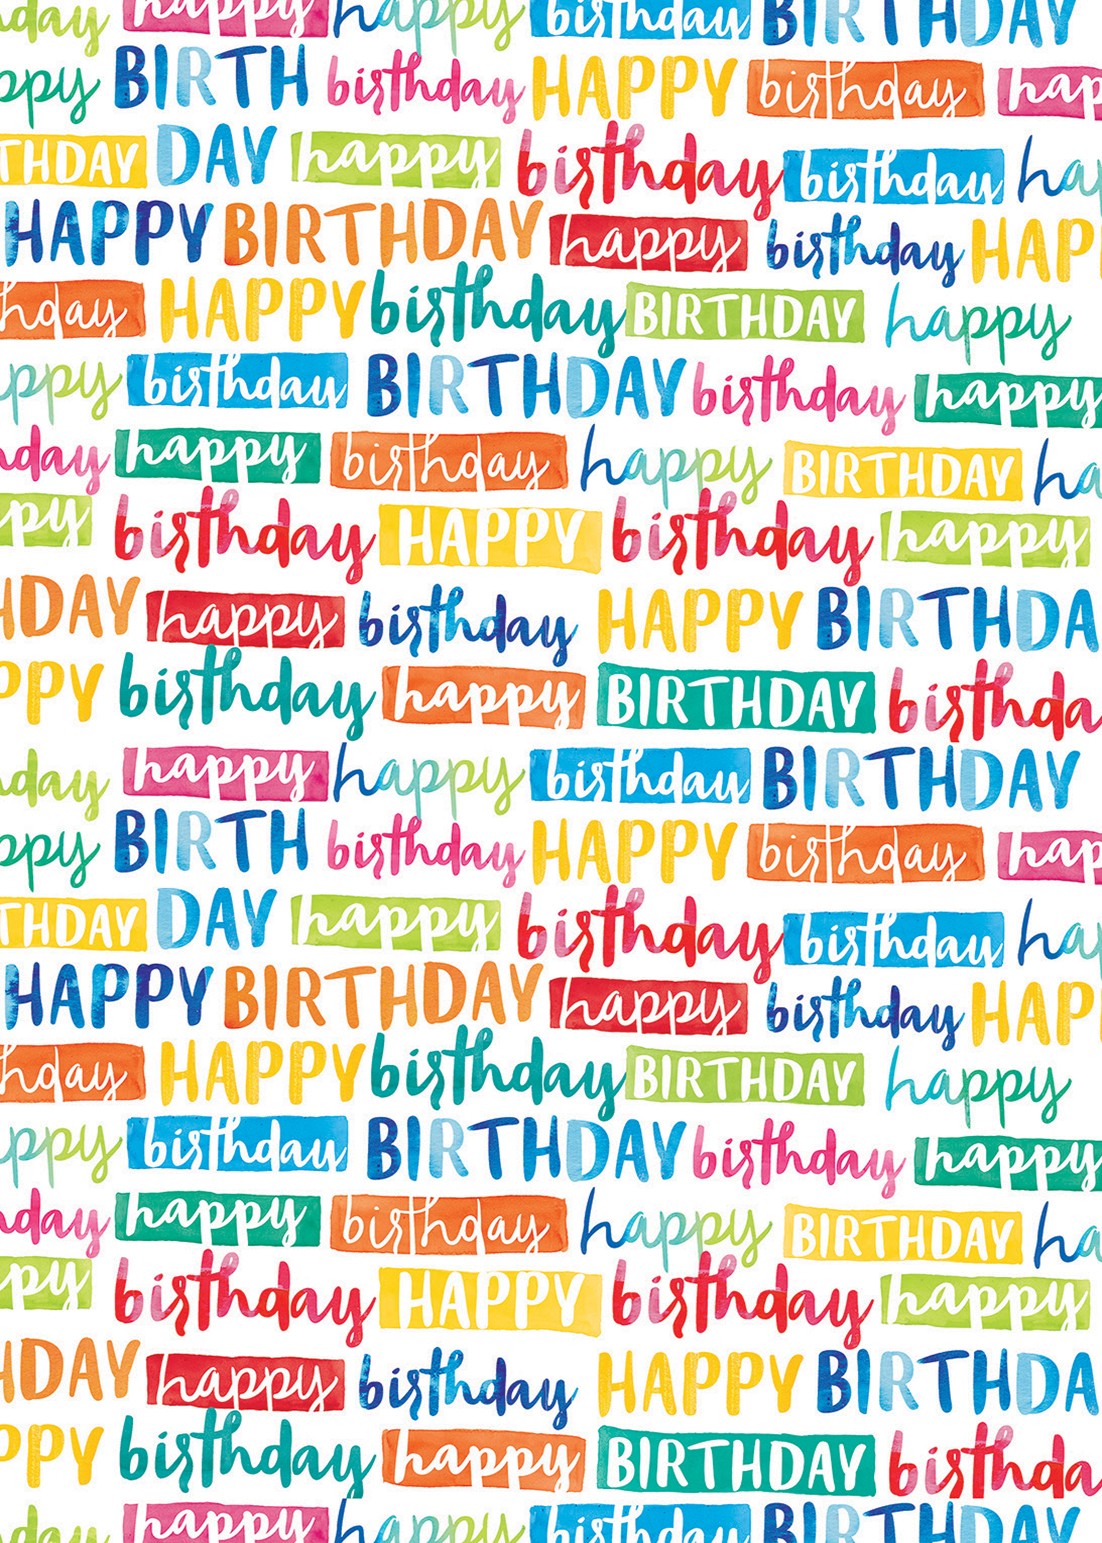 painted-birthday-gift-wrap-suitable-for-any-age-birthday